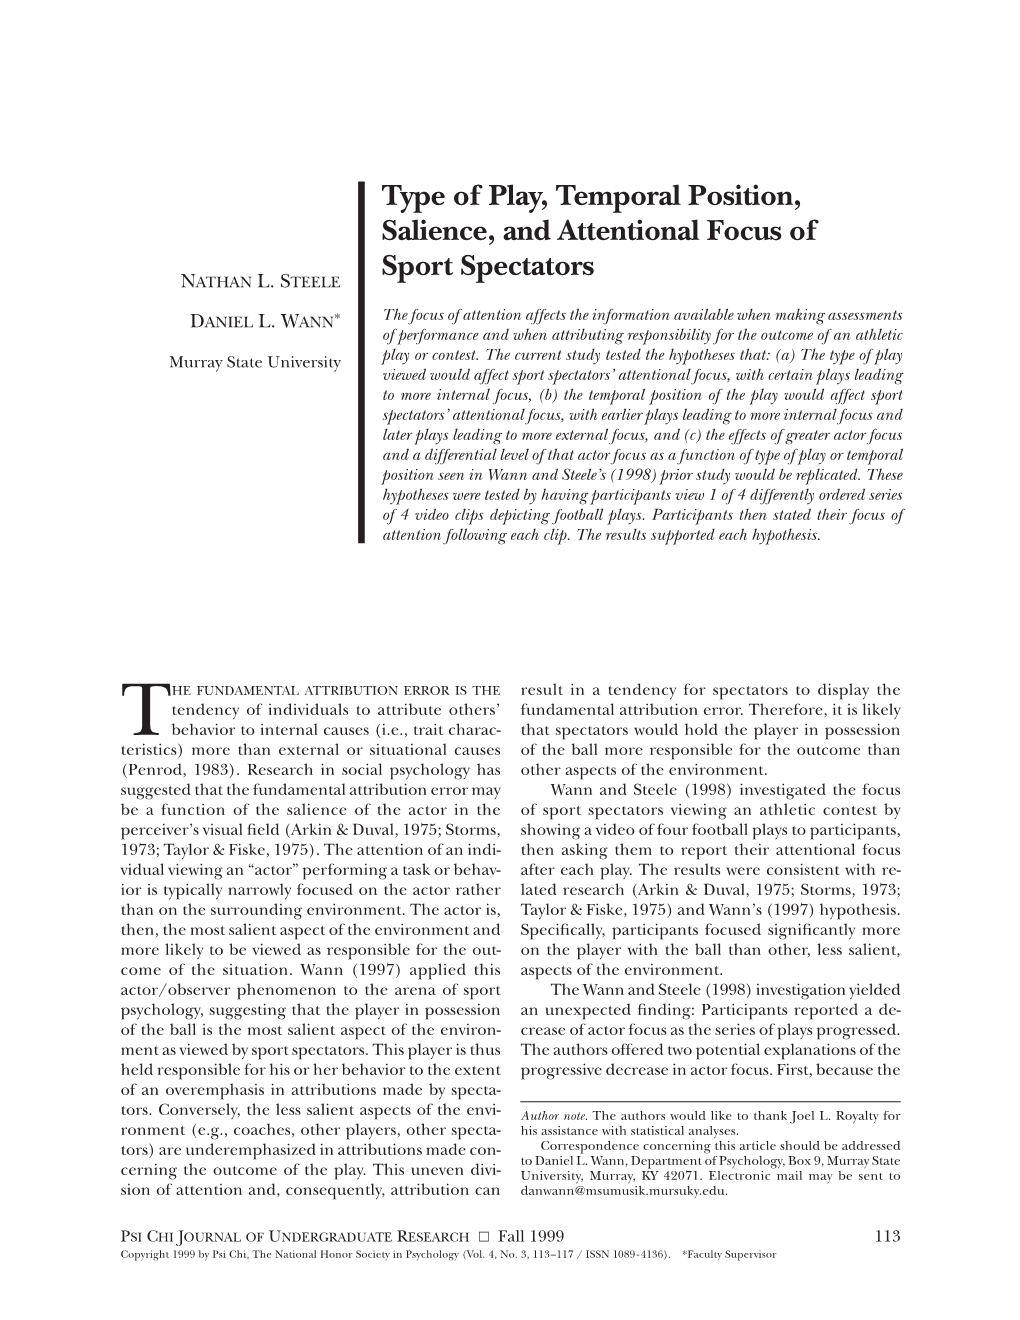 Type of Play, Temporal Position, Salience, and Attentional Focus of Sports Spectators